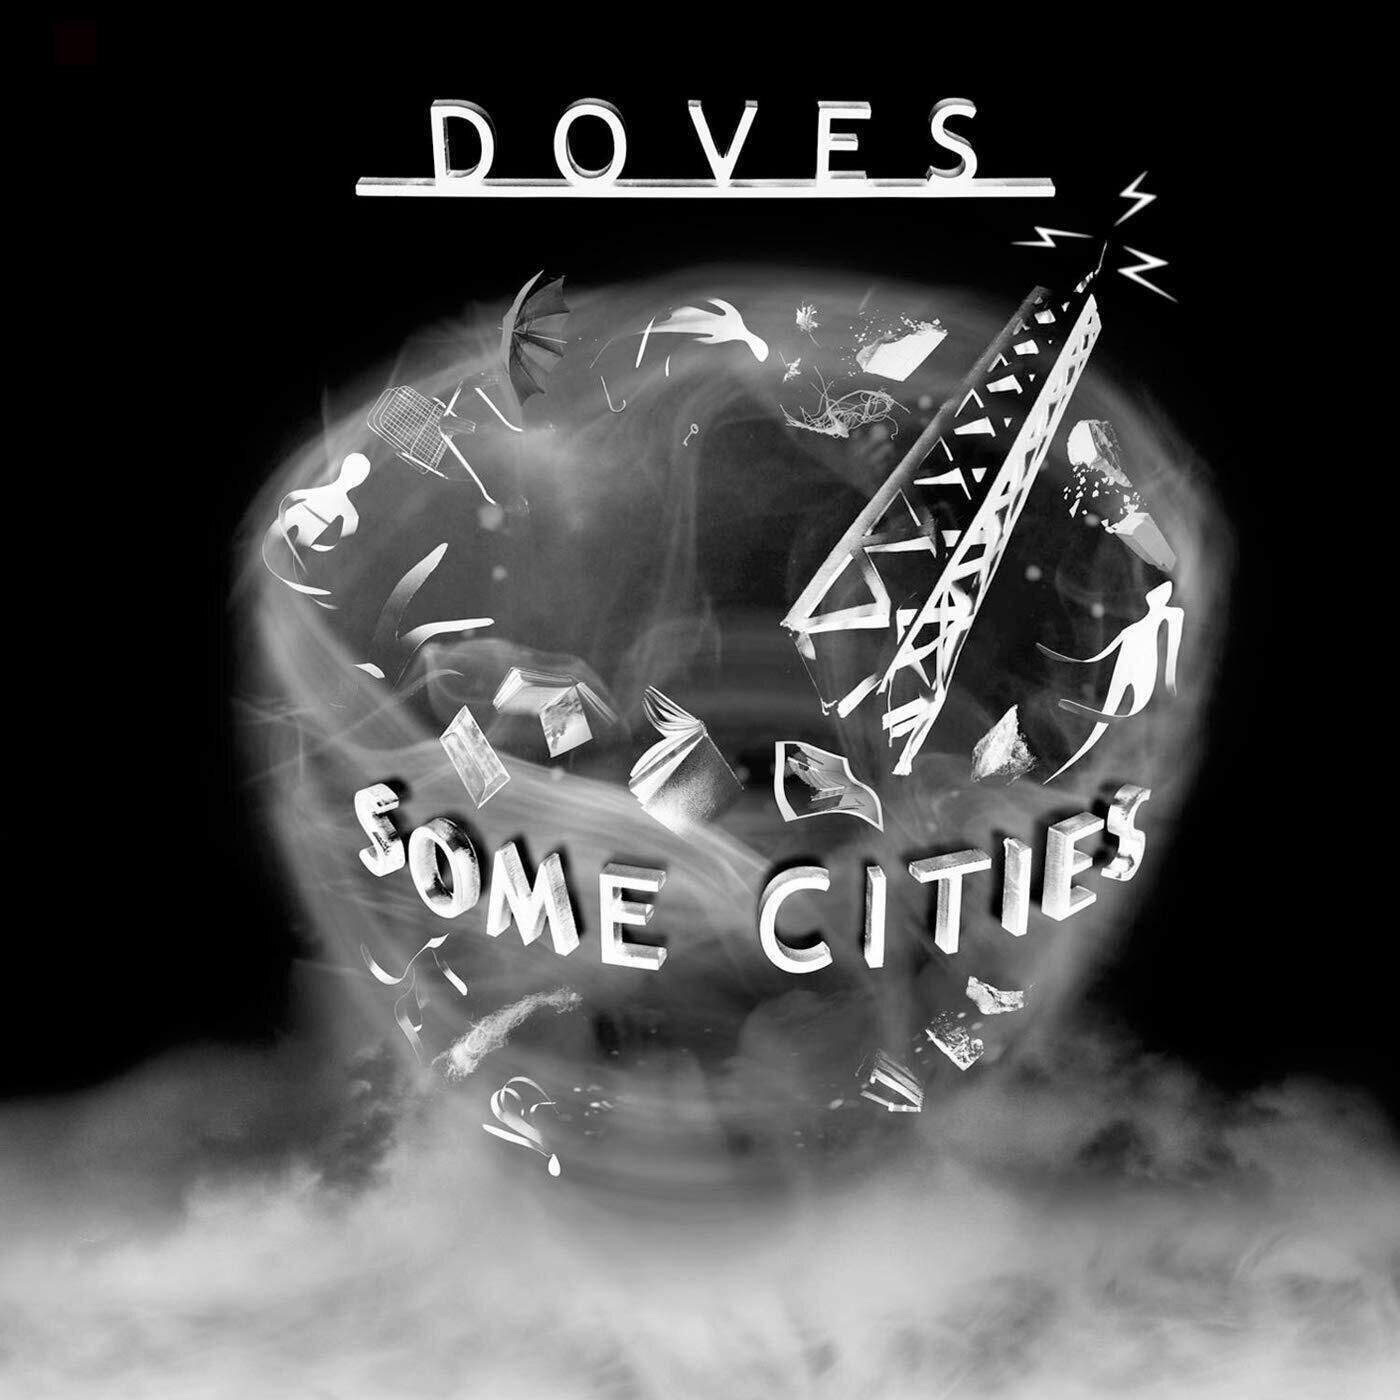 Schallplatte Doves - Some Cities (White Coloured) (Limited Edition) (2 LP)